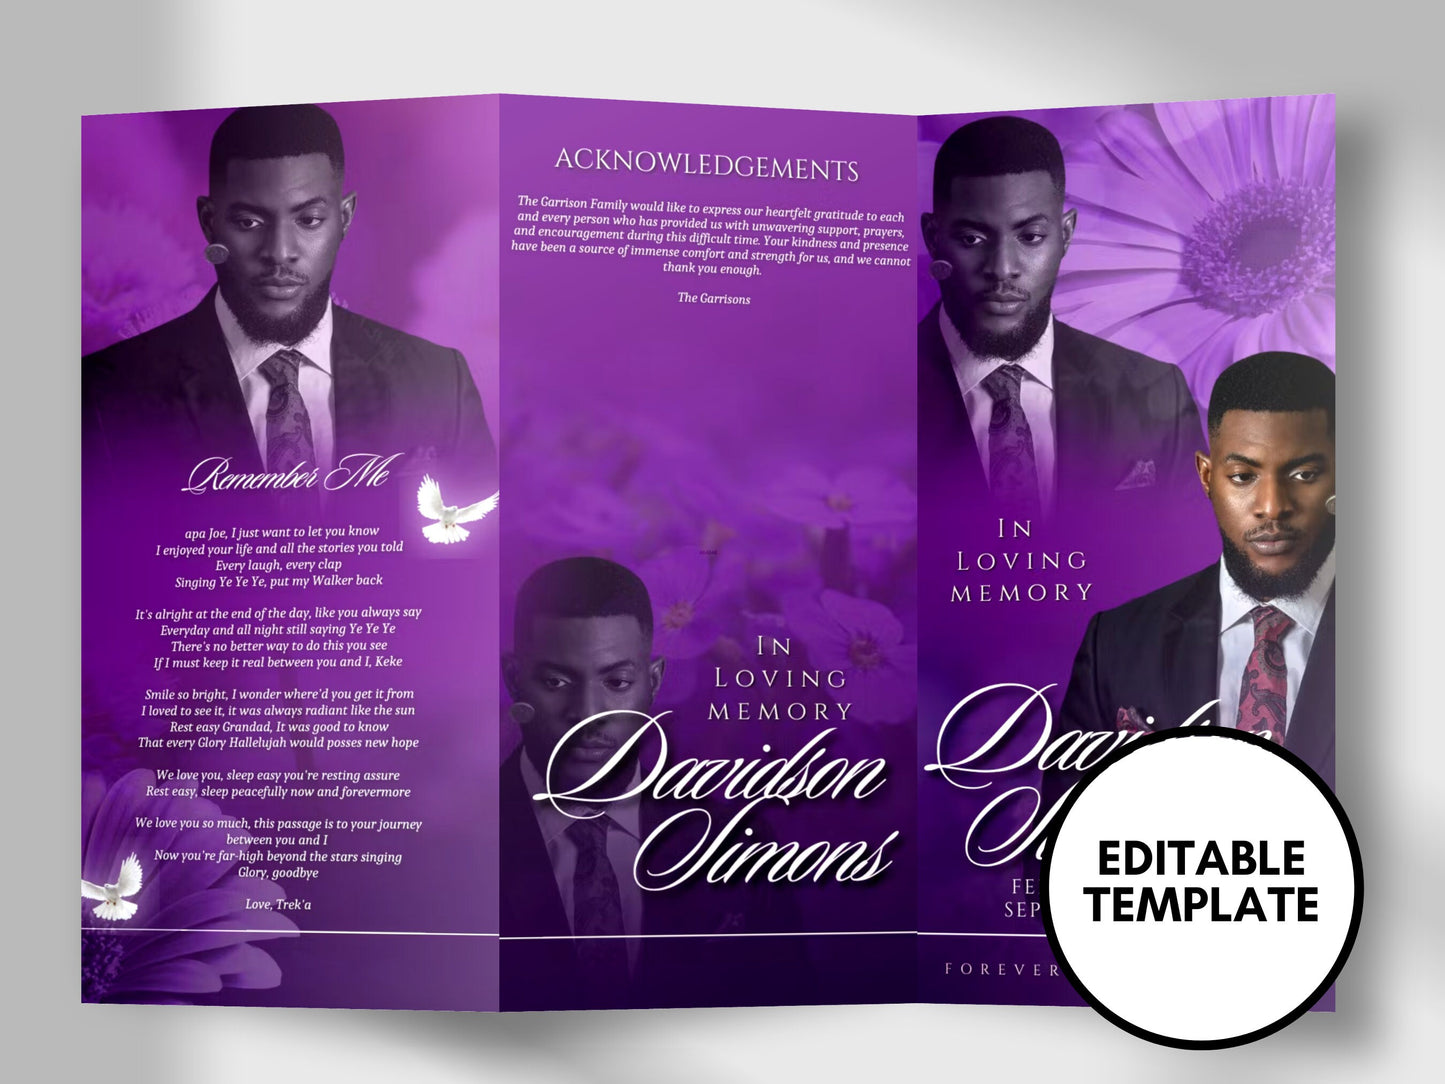 17"x11" FUNERAL OBITUARY TEMPLATE (2 pages) |Purple, Lily Funeral Program | Celebration of Life |Classy Obituary |Canva Template